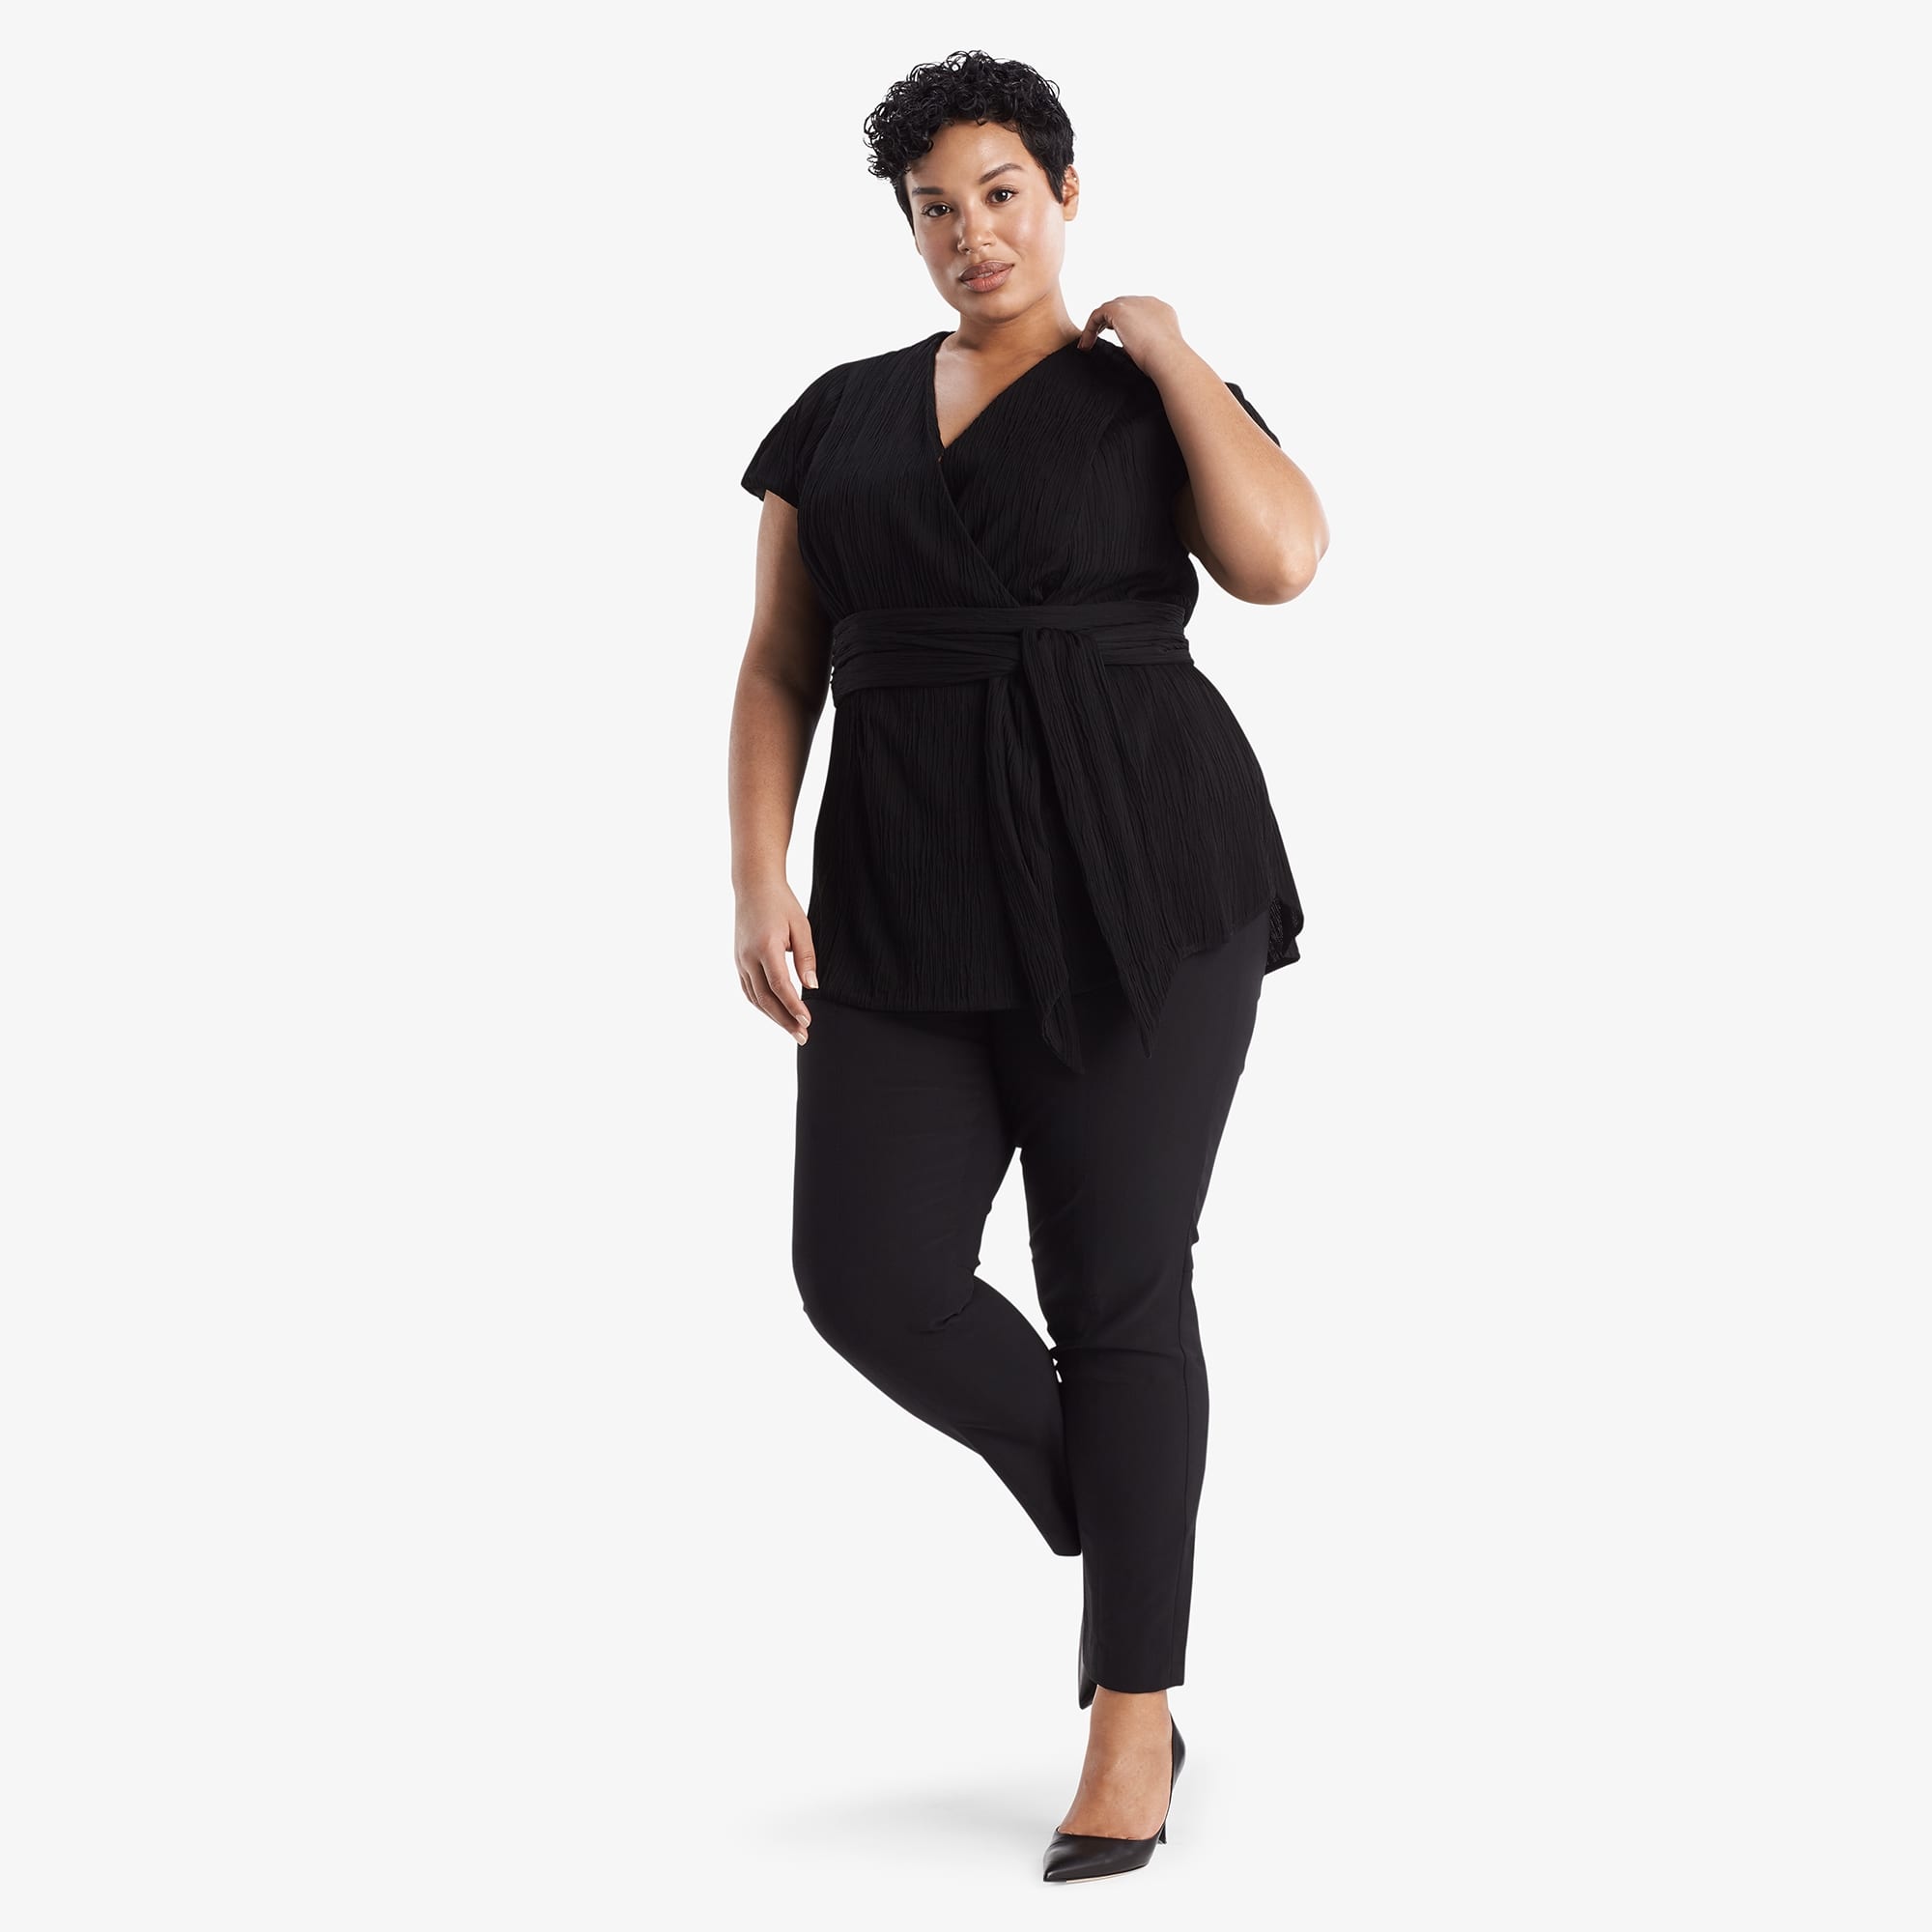 Front image of a woman standing wearing the Valerie Top in black